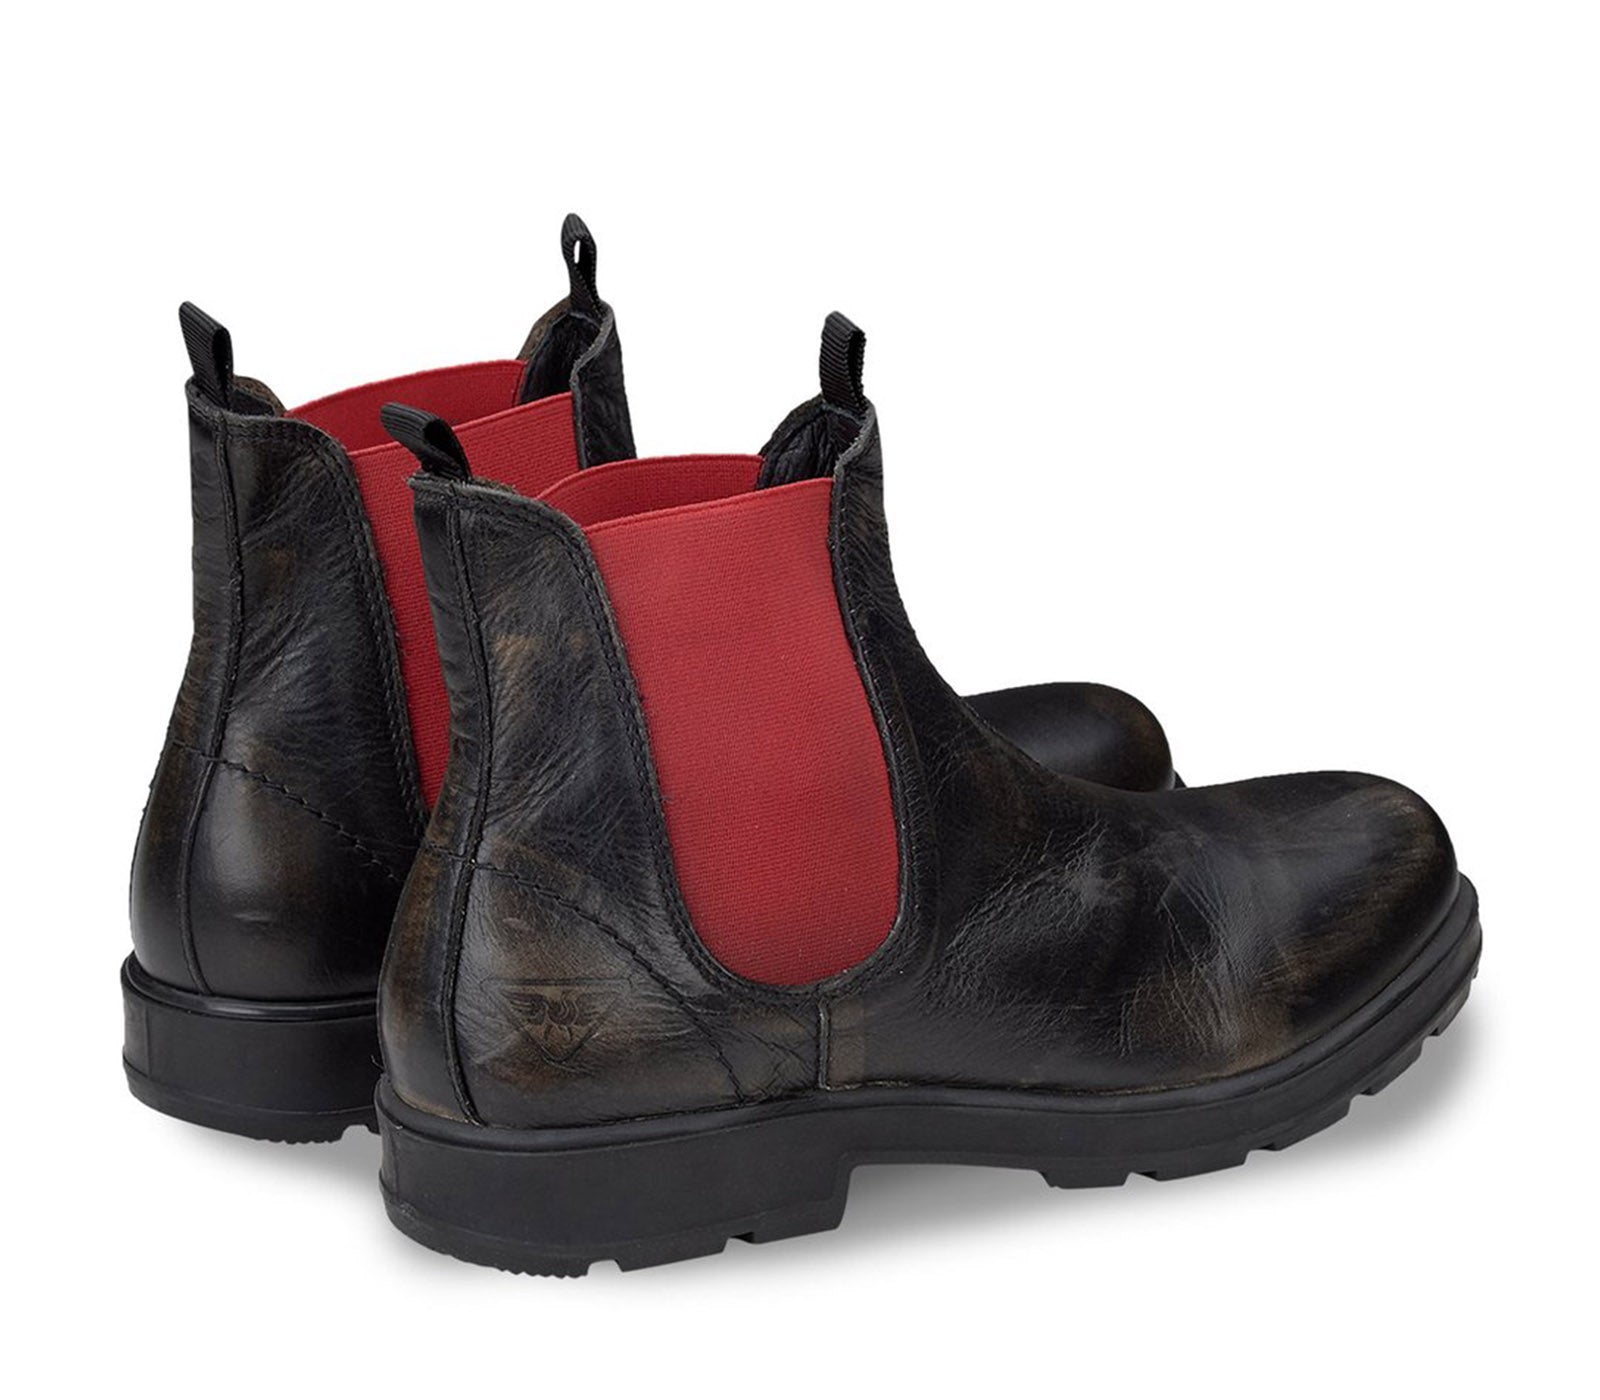 Men's Black Leather Chelsea Boots with Red Elasticized Inserts